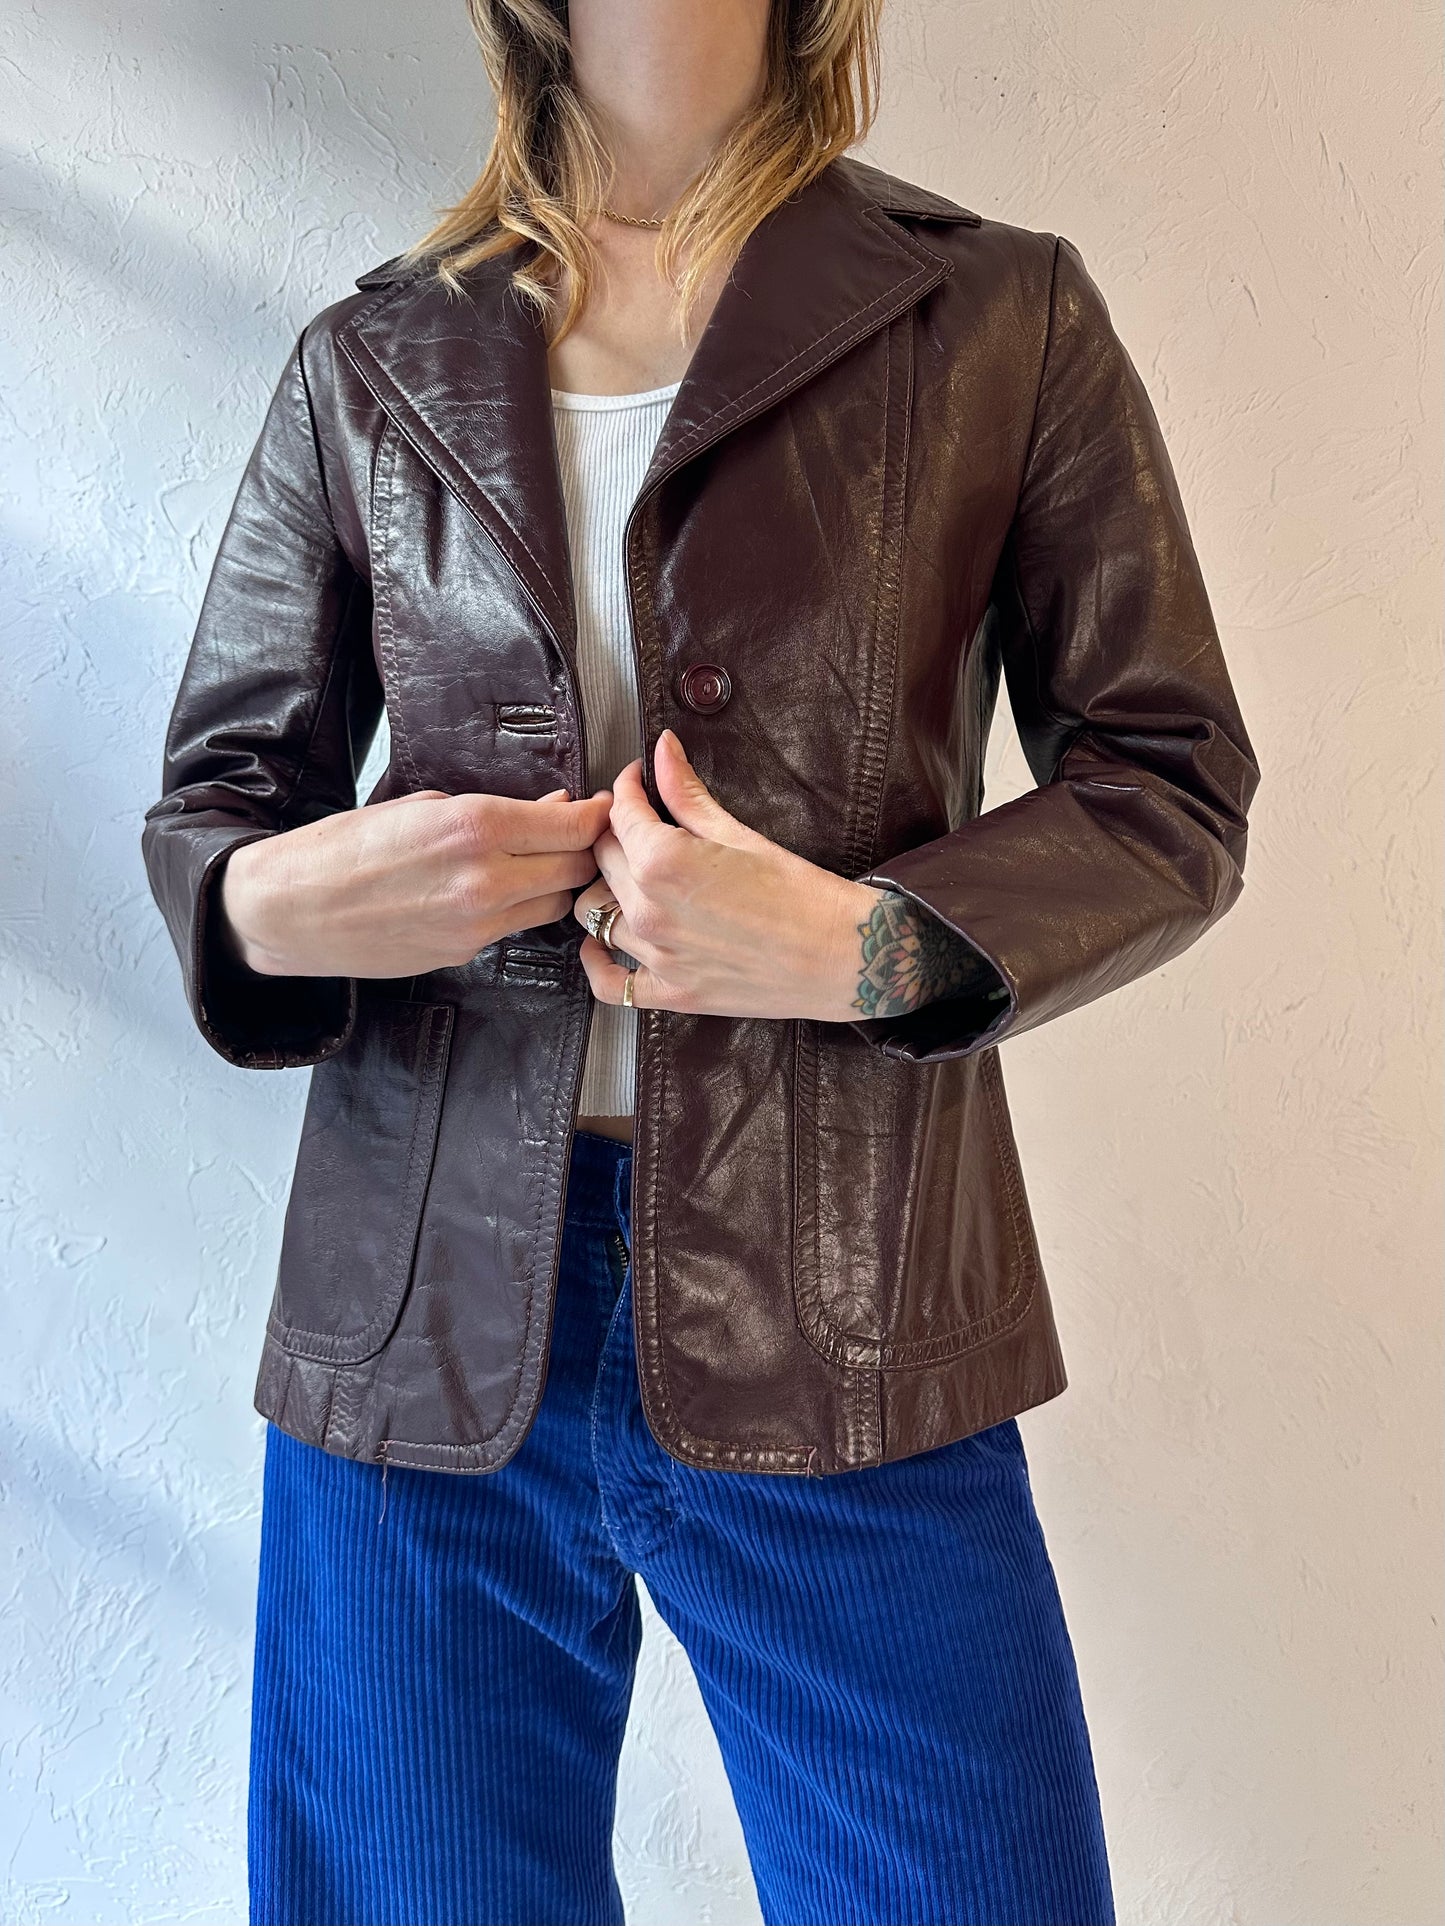 80s 'General Leather' Burgundy Leather Jacket / Small